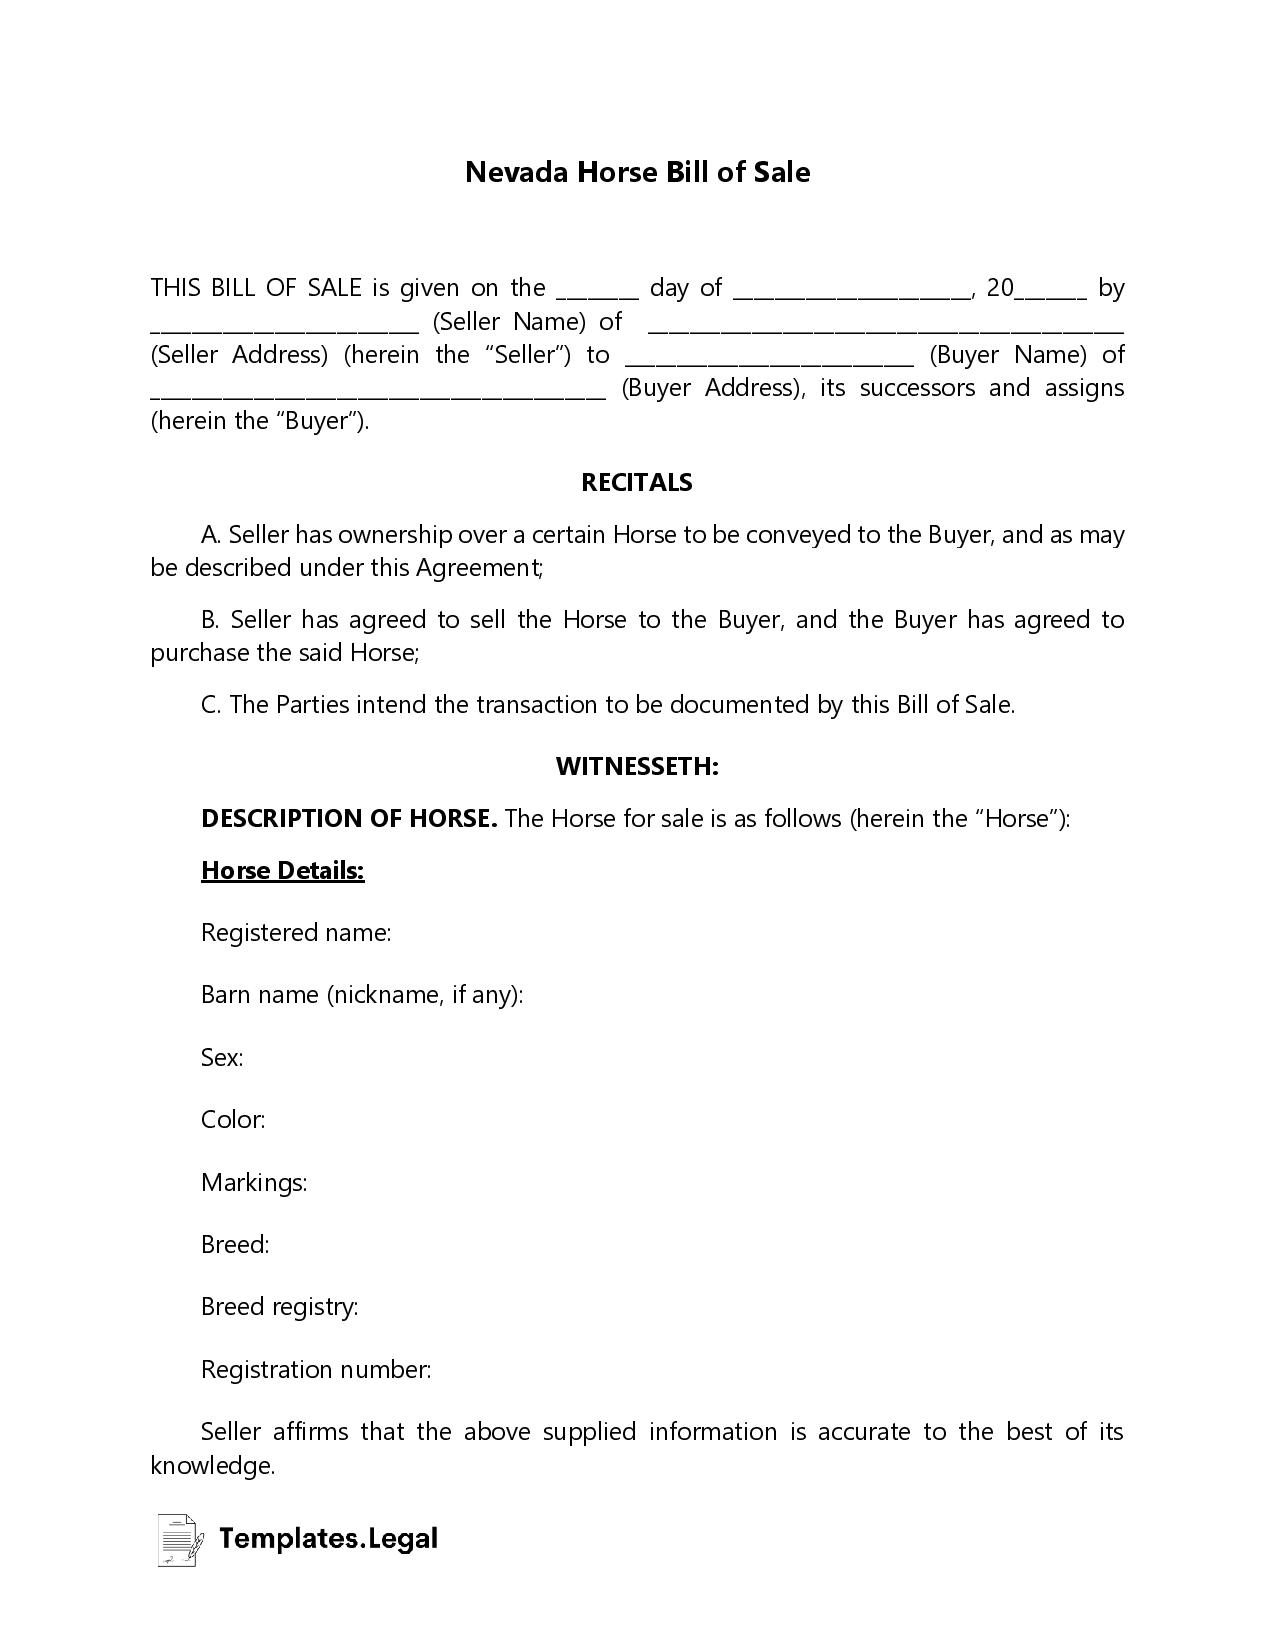 Nevada Horse Bill of Sale - Templates.Legal